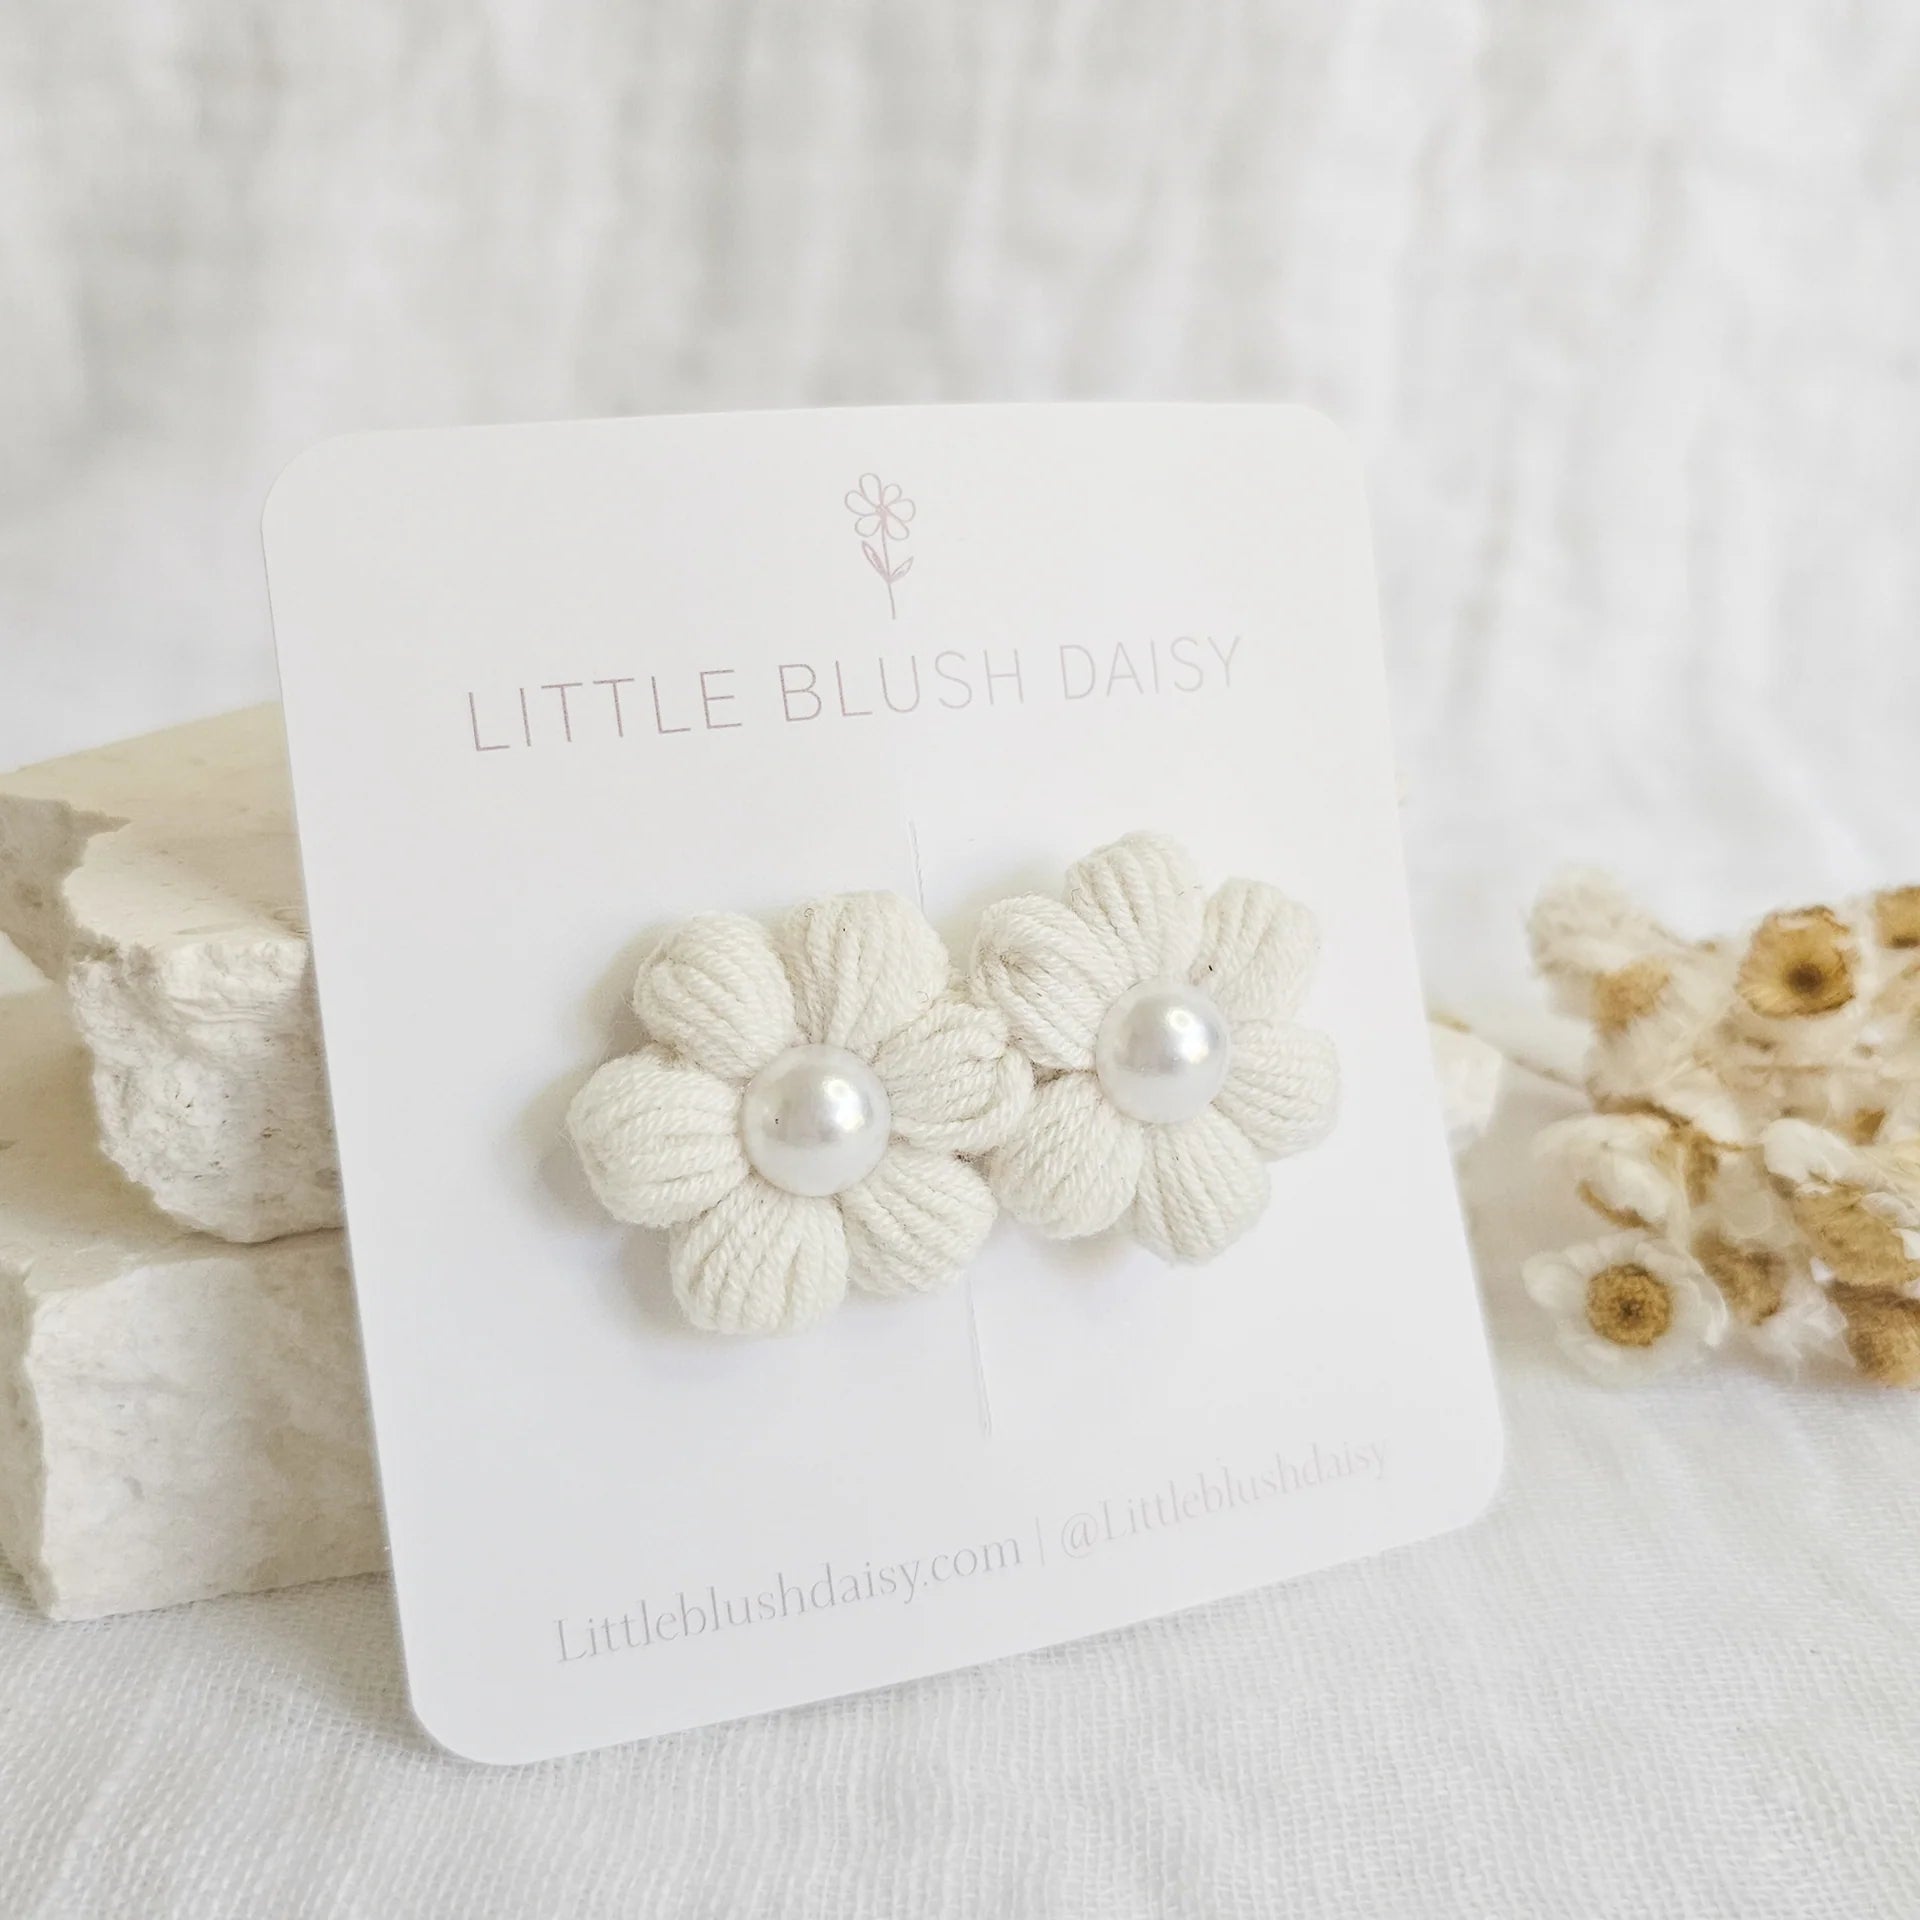 Pearl Puff Daisy Fully Lined Clips